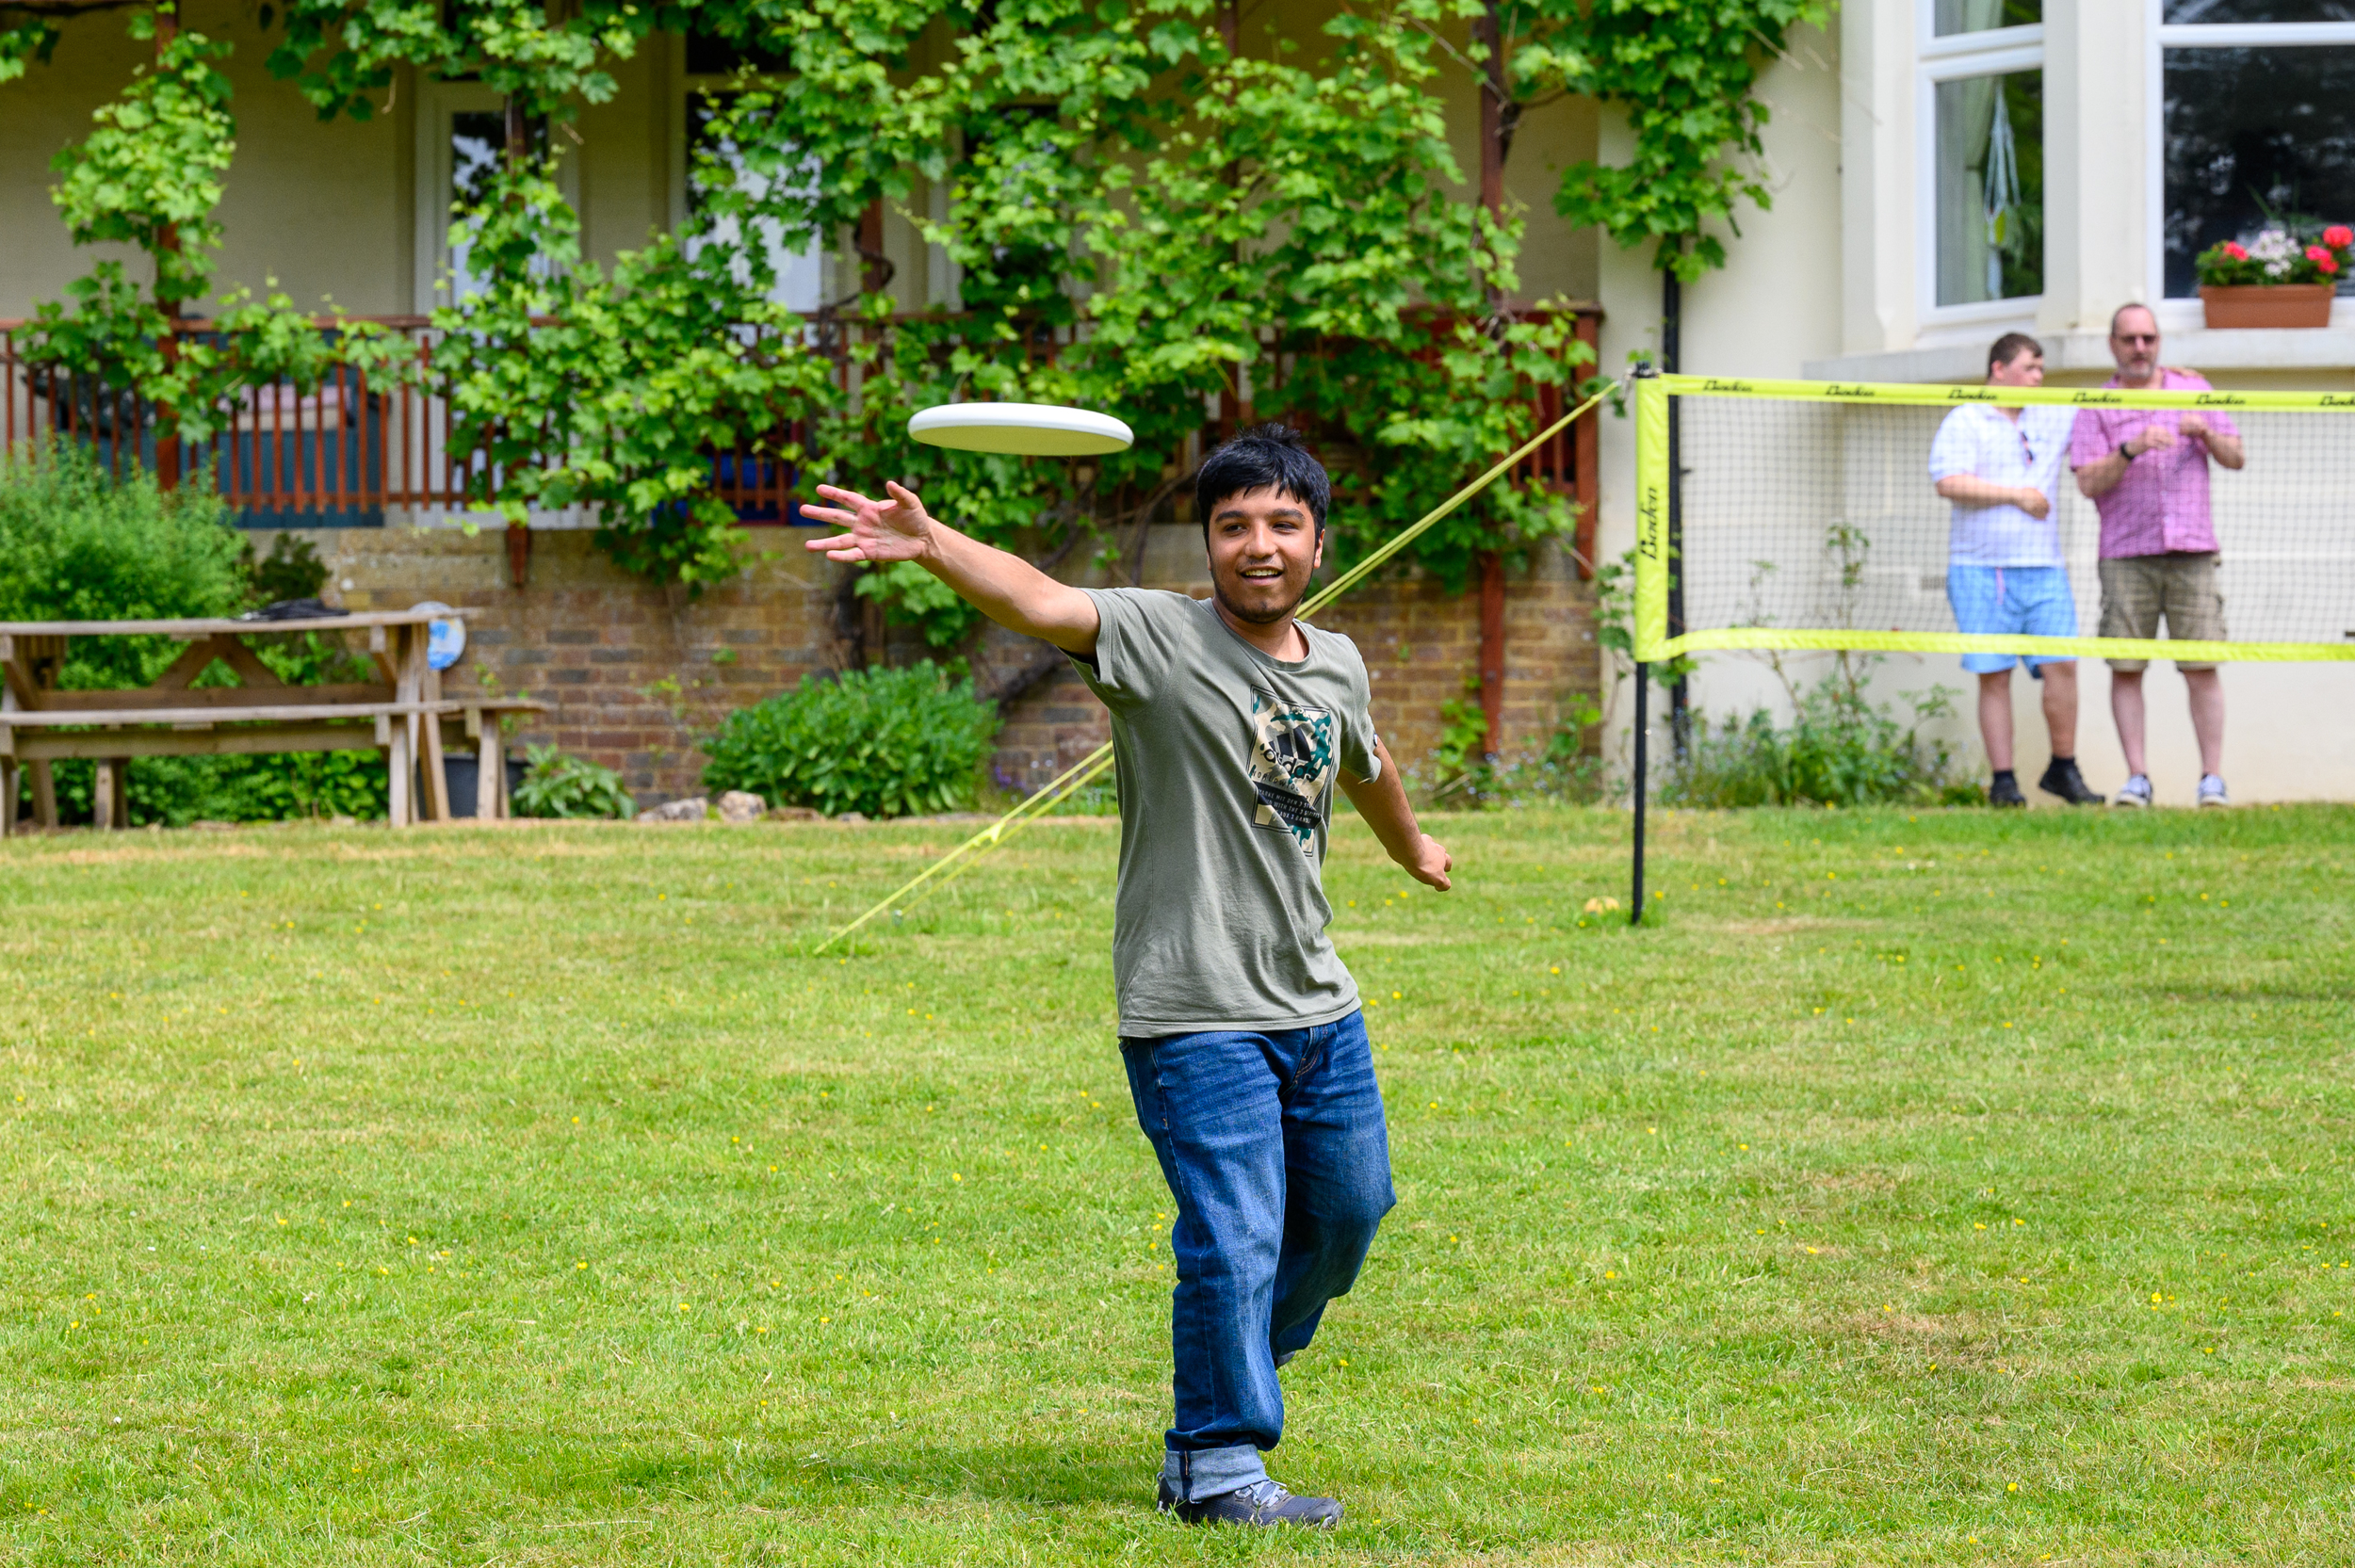 A student throwing a frisbee 